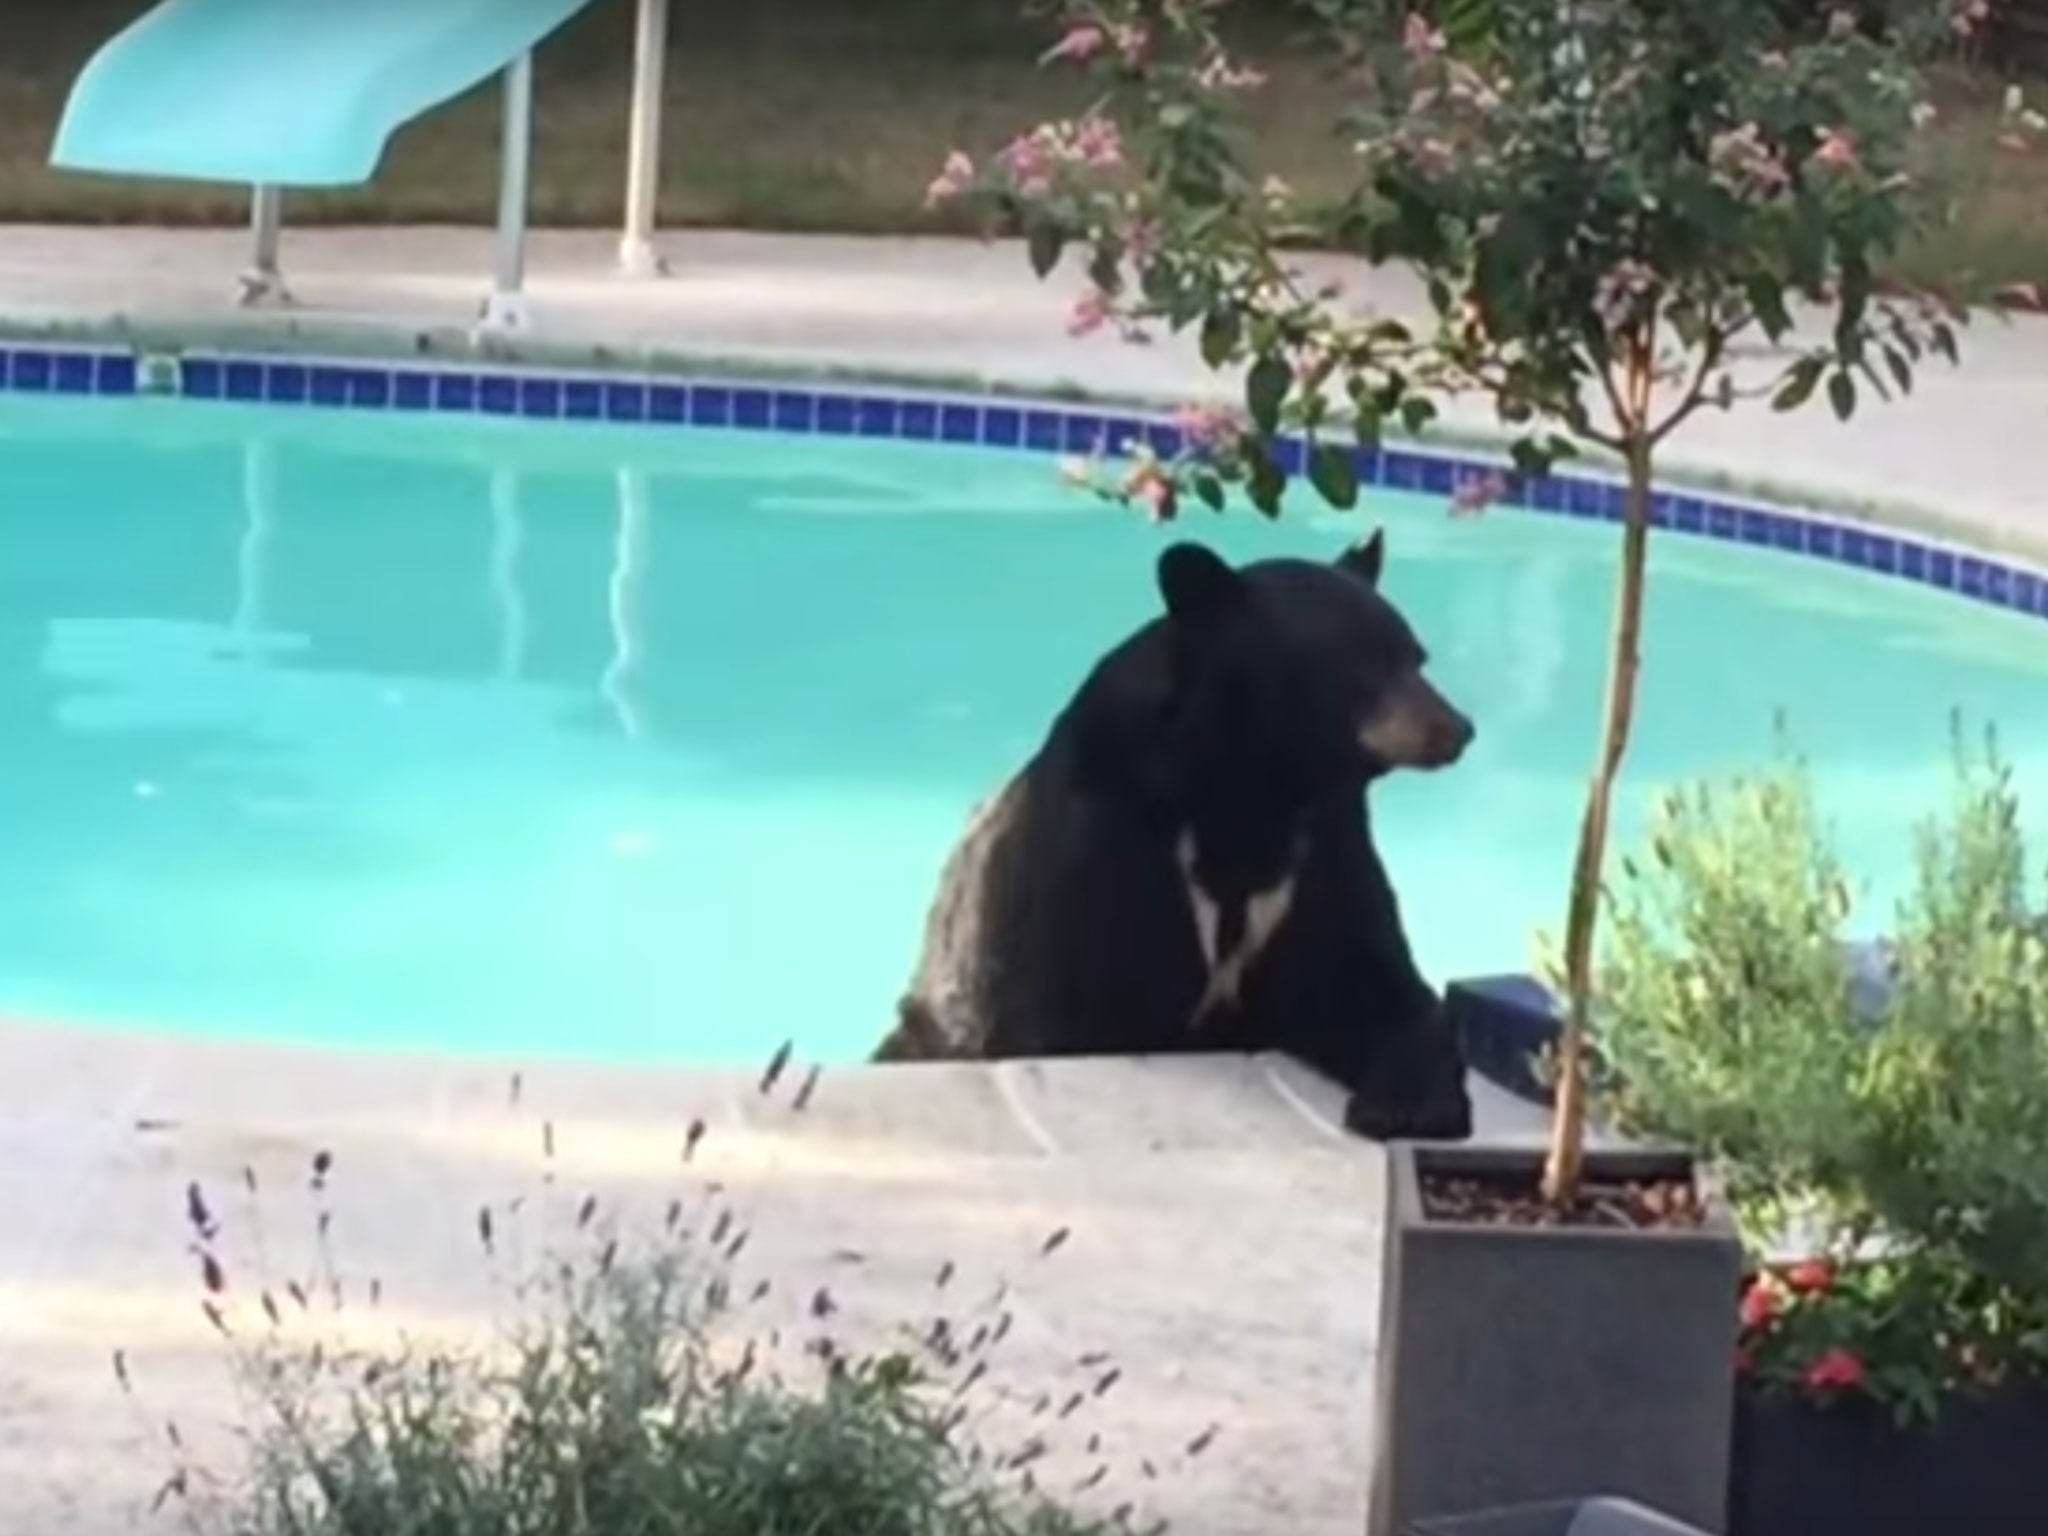 The bear was spotted having a relaxing dip in the pool of a Vancouver home